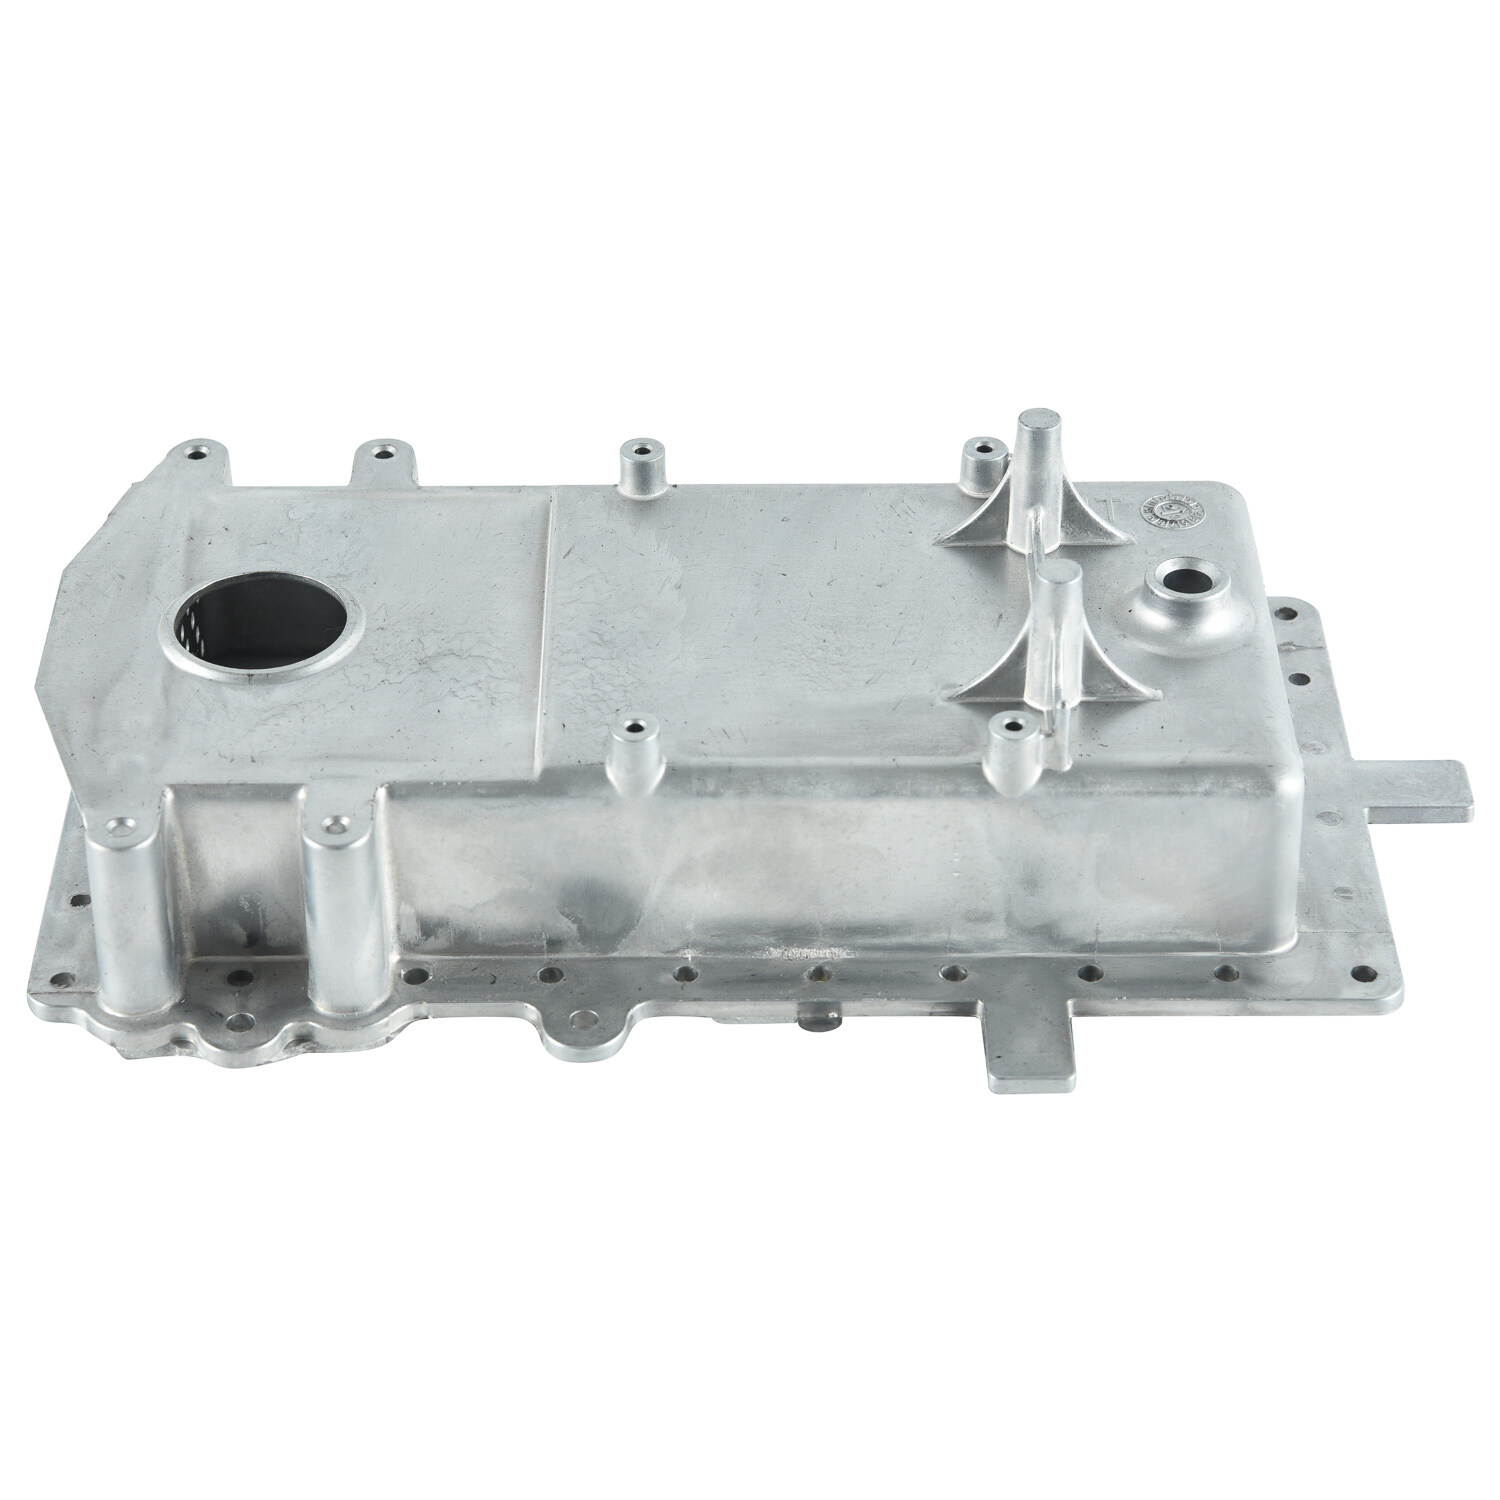 China products/suppliers. Customized Aluminum High Pressure Die Casting